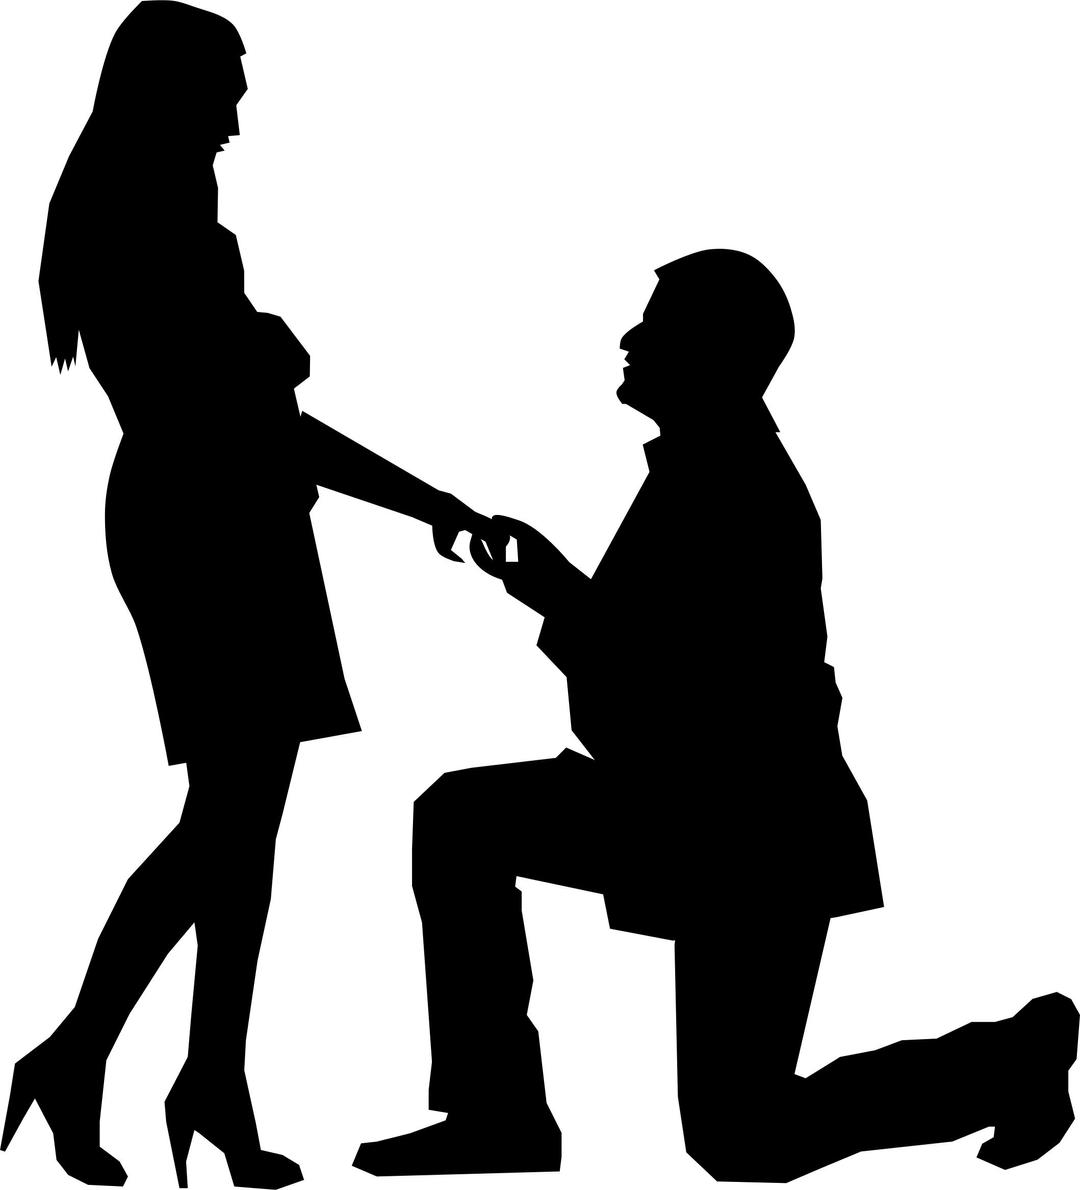 Man On One Knee Silhouette png transparent